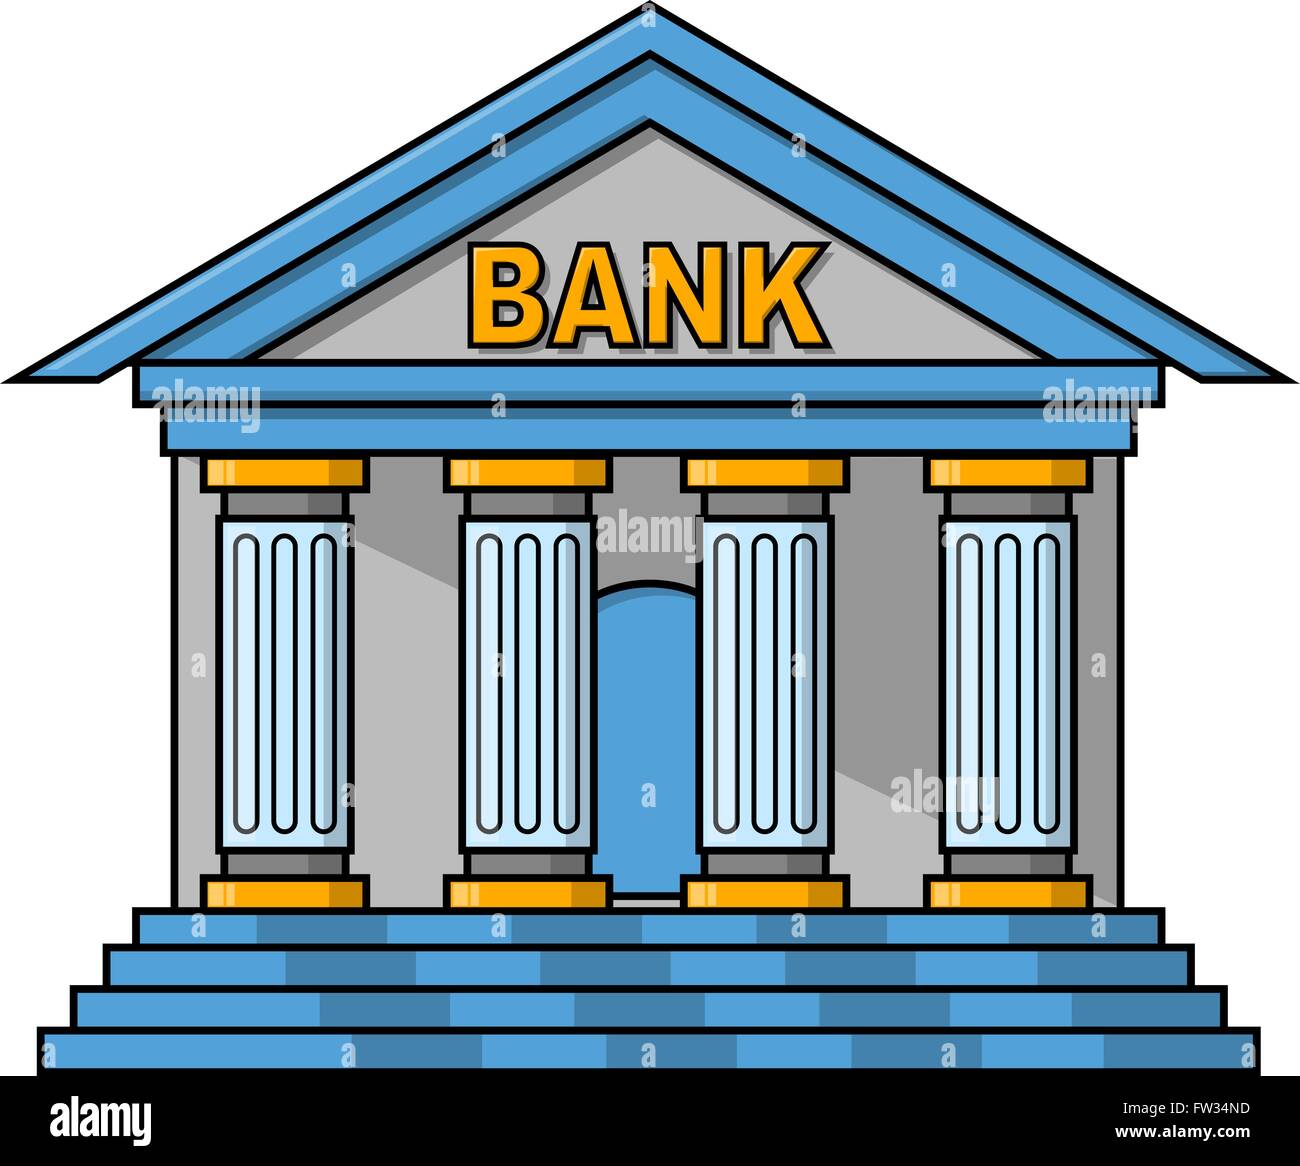 clipart of a bank building - photo #20